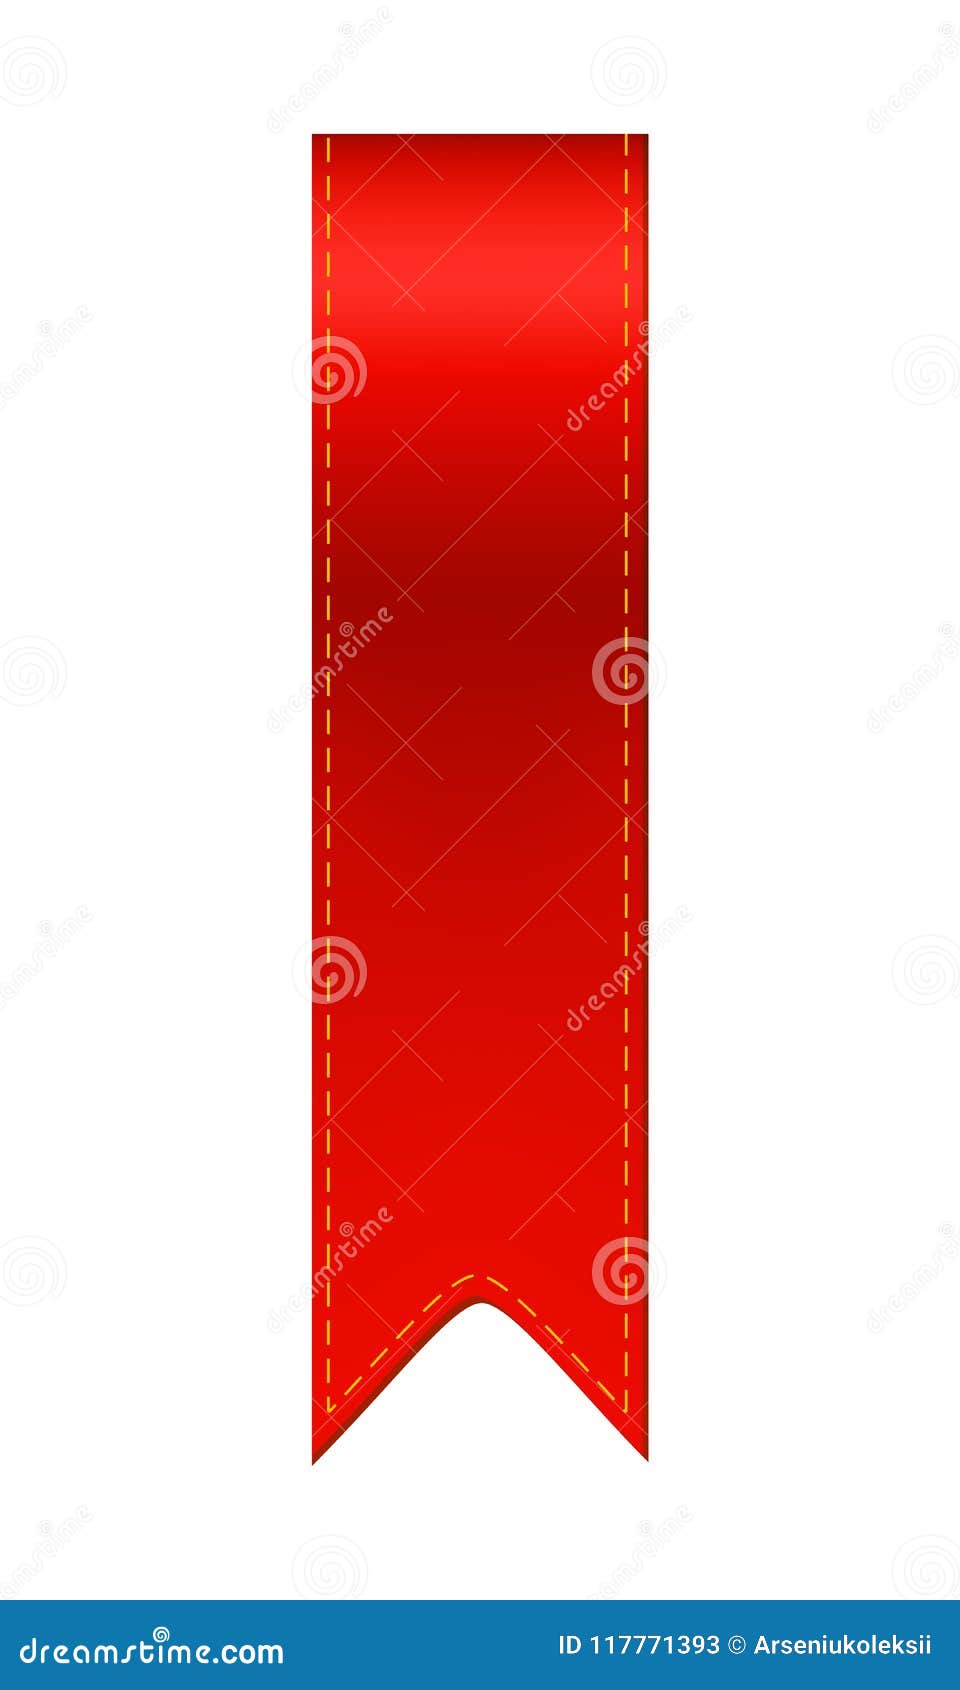 https://thumbs.dreamstime.com/z/red-bookmark-ribbon-simple-bookmarker-icon-illustration-117771393.jpg